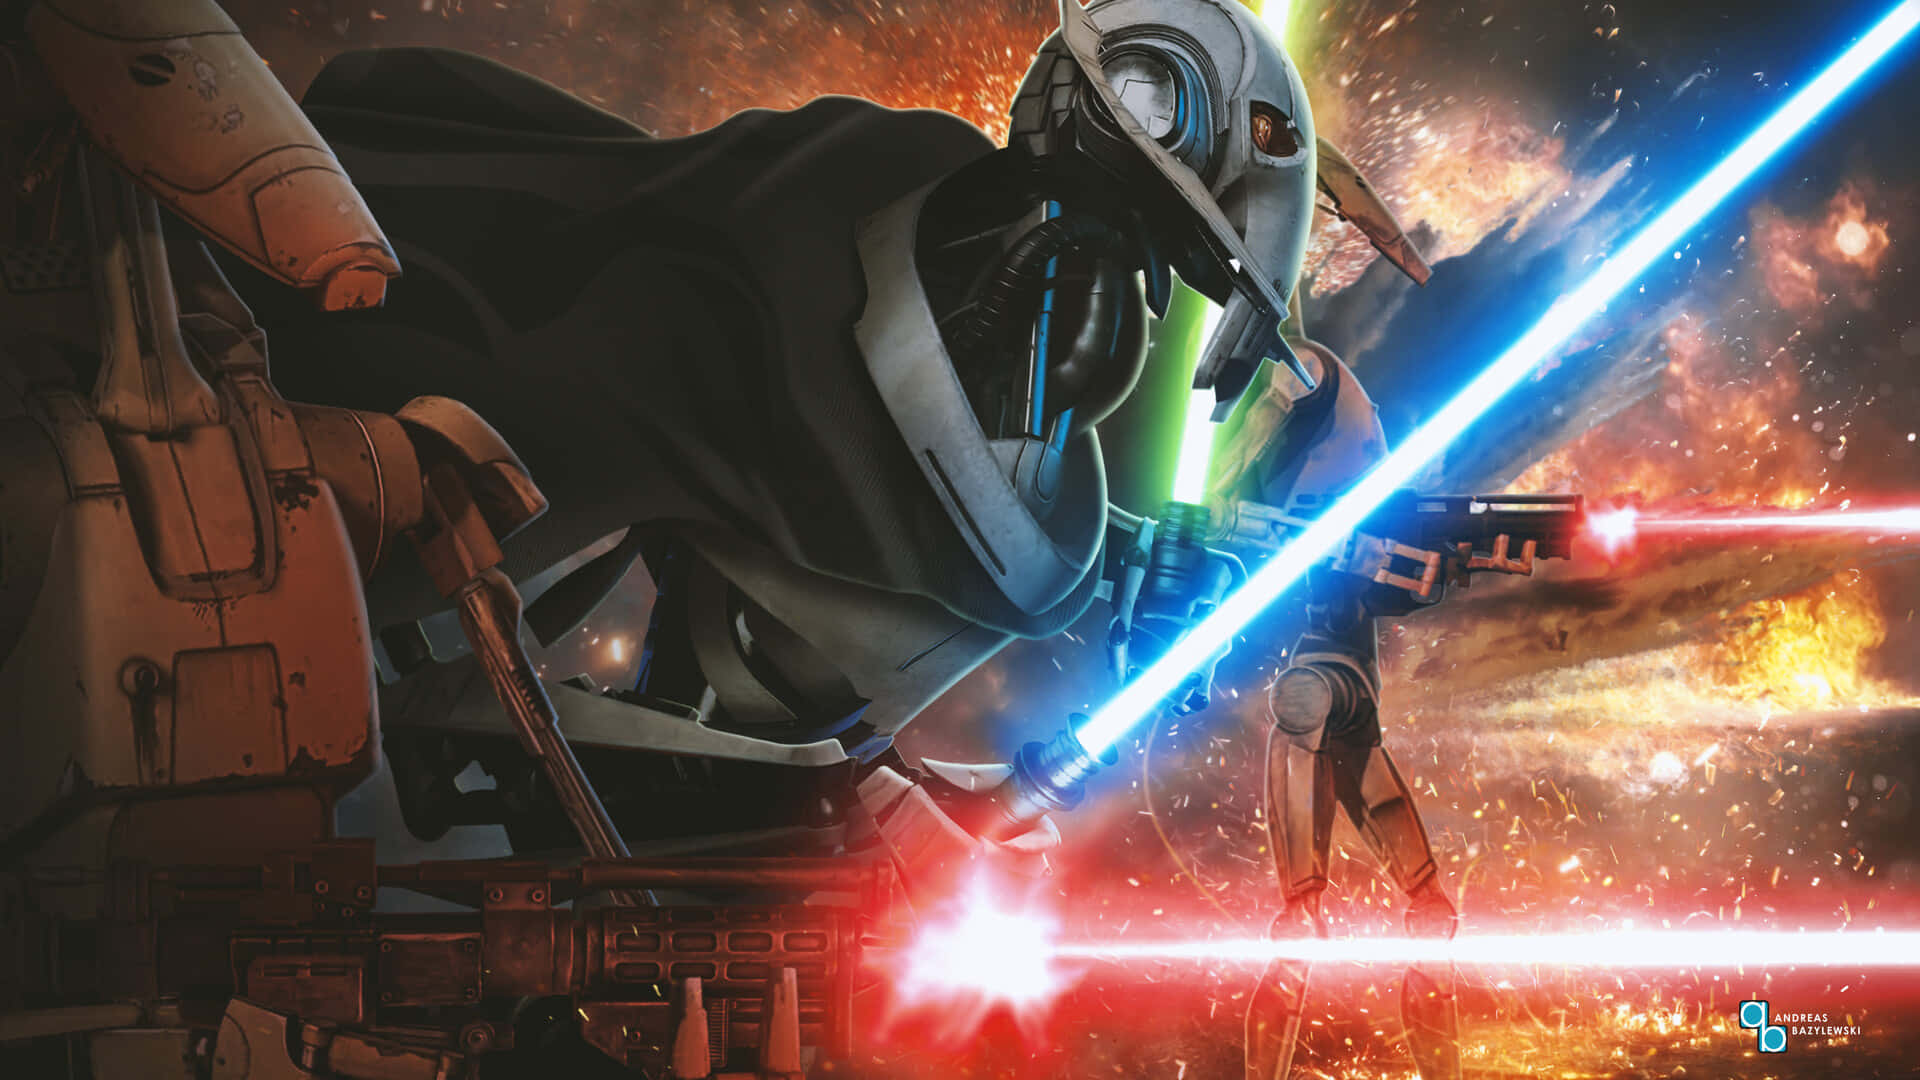 General Grievous Blue And Red Background